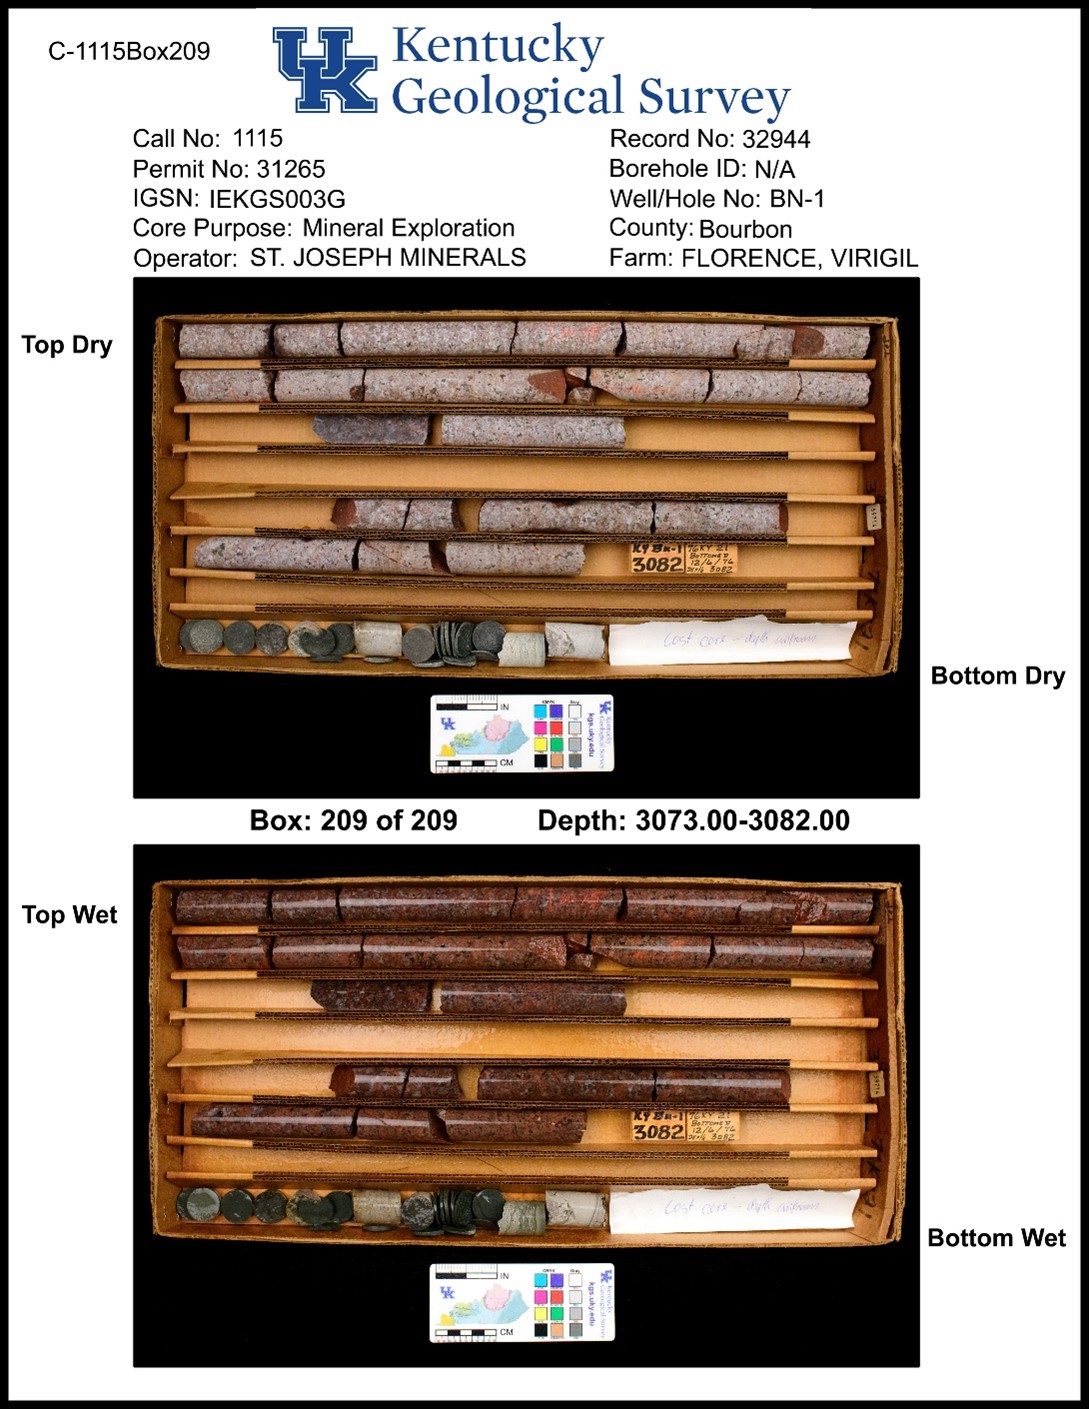 Photograph of one box of the St. Joseph Minerals #BN-1 core.